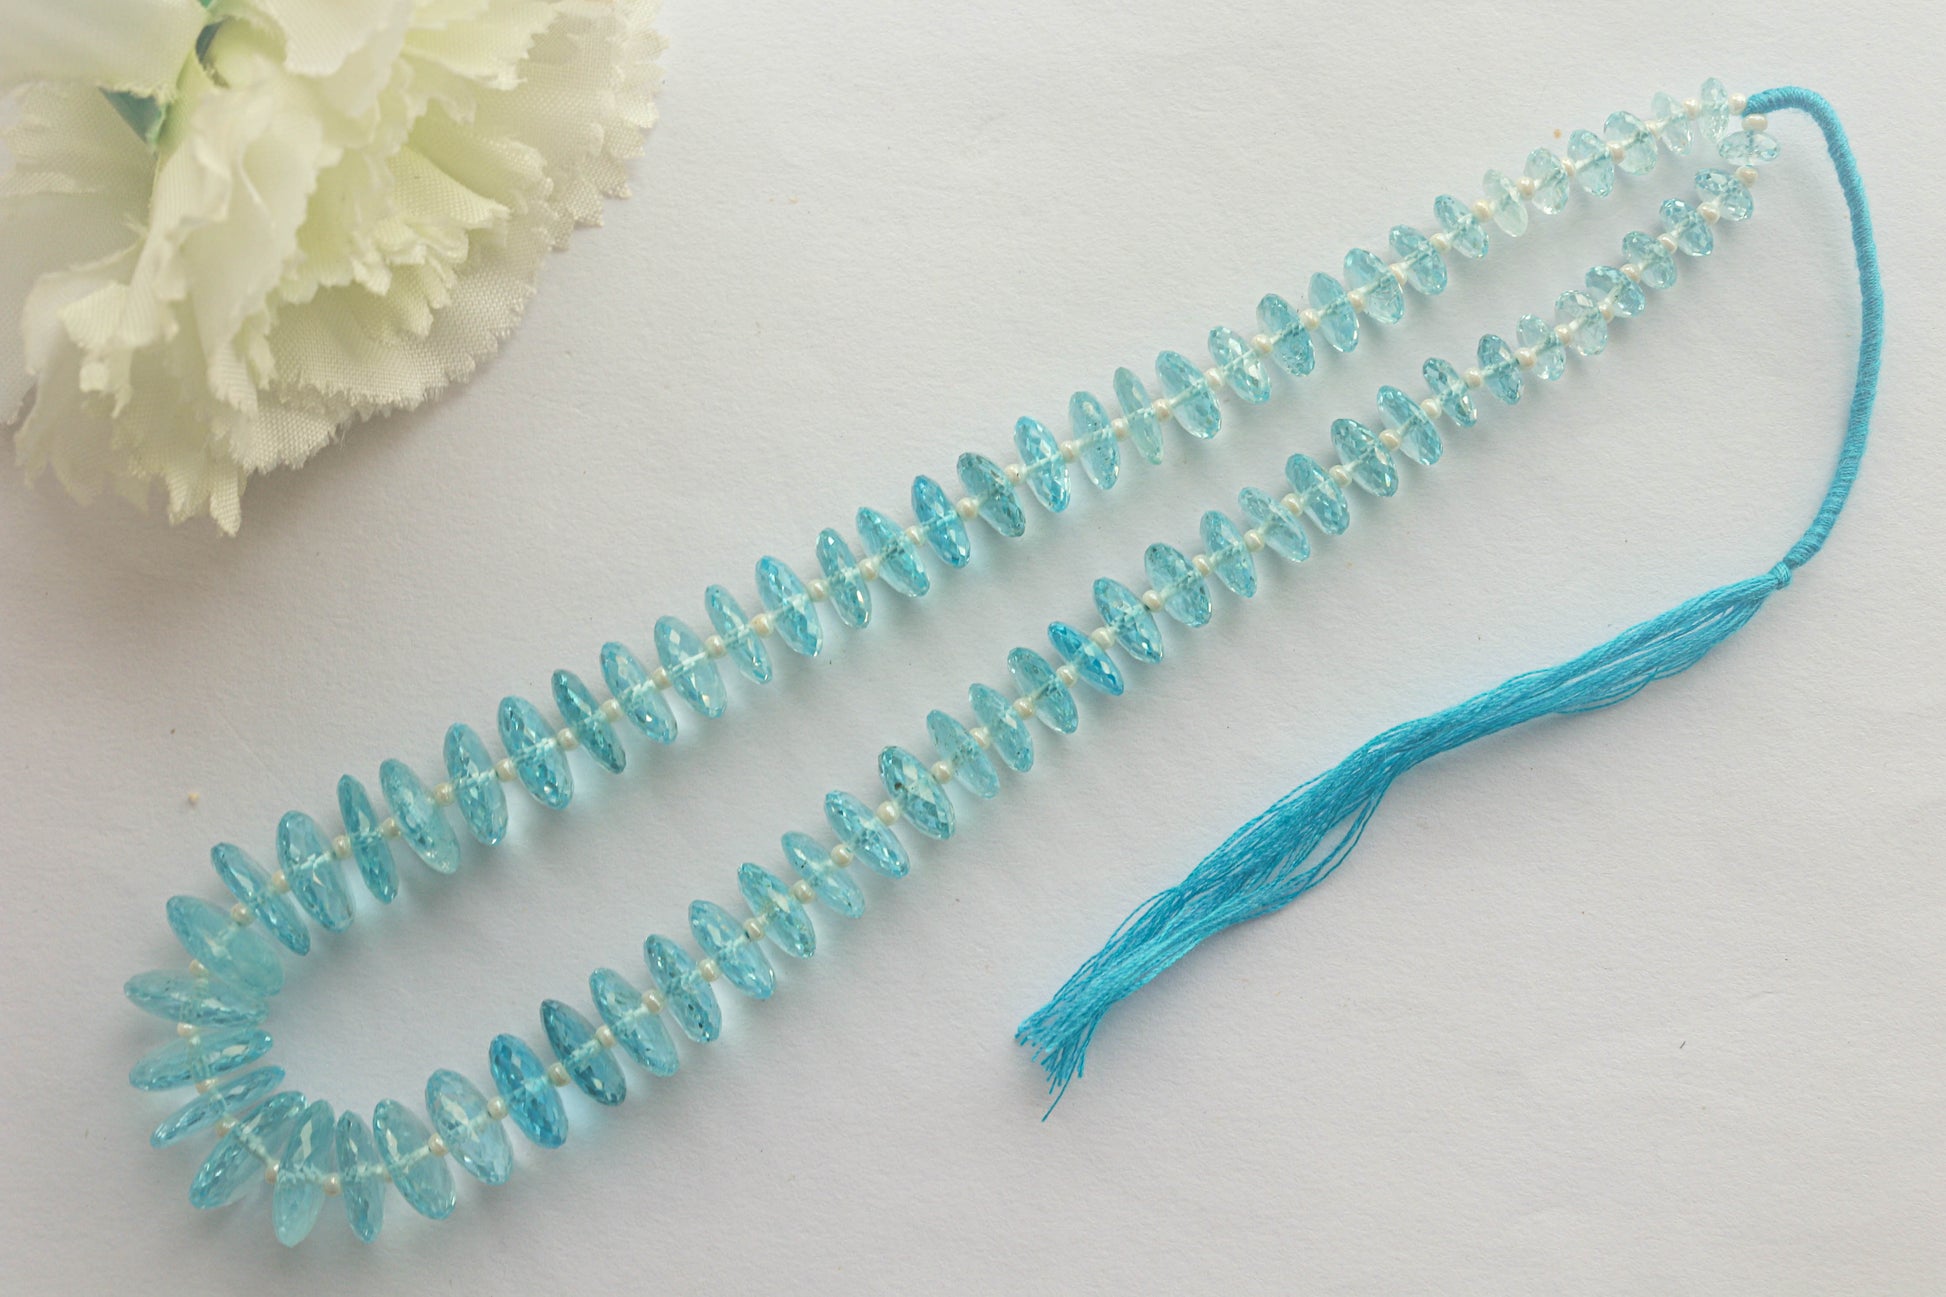 Blue Topaz Faceted Rondelle Beads | 12 Inch String Beadsforyourjewelry